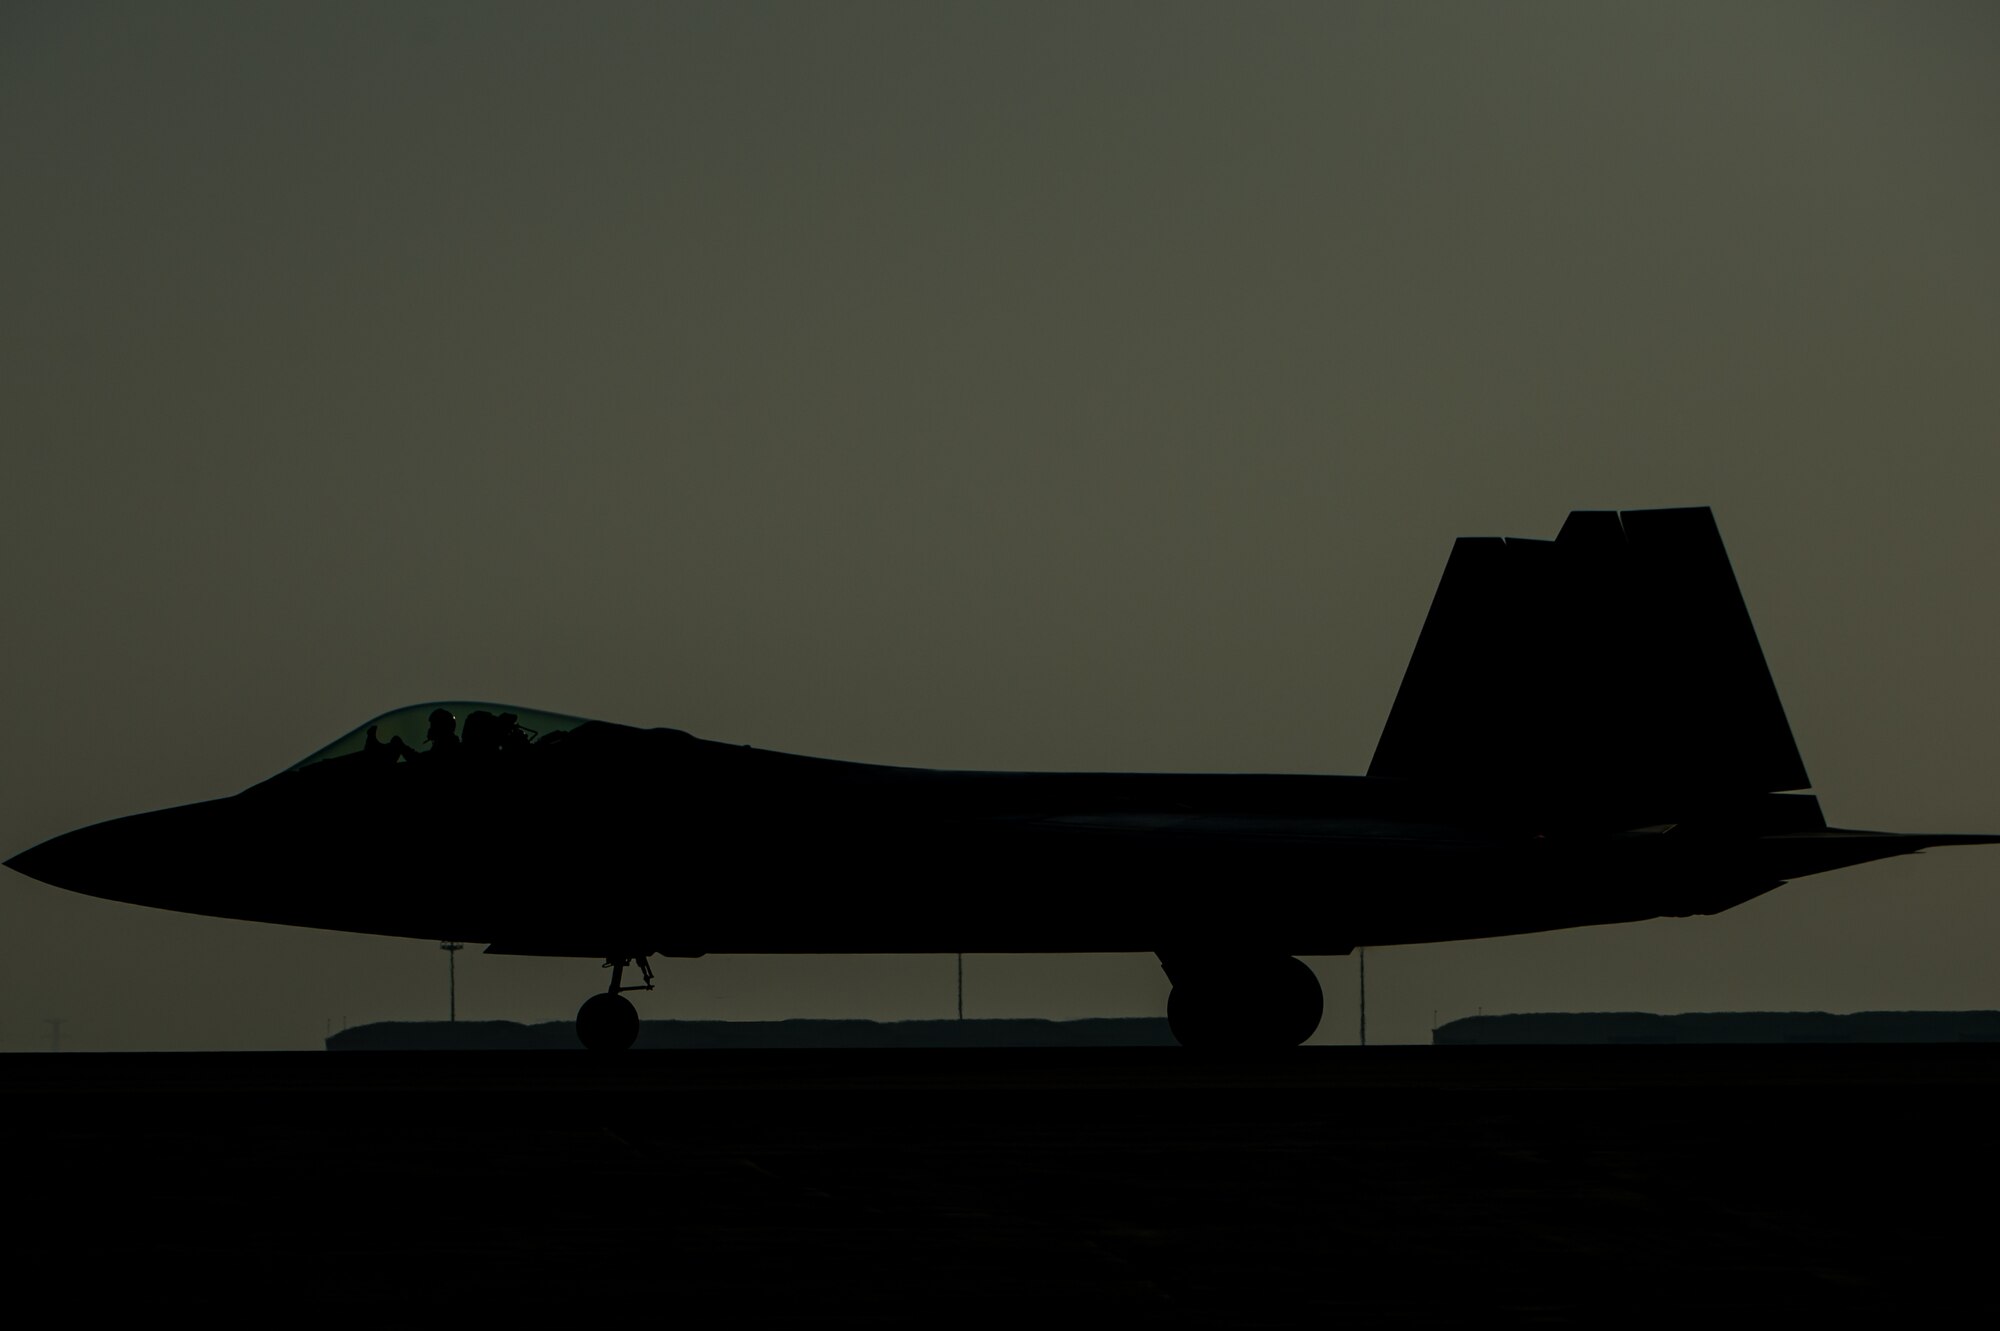 After completing a sortie in support of Operation Inherent Resolve, an F-22 Raptor taxis across a runway at an undisclosed location in Southwest Asia, Nov. 11, 2016. OIR has been the most precise air campaign in the history of warfare. Ninety-nine percent of all munitions expended are precision-guided. The F-22s have provided more than 650 missions hours in support of the liberation of Mosul, Iraq.  